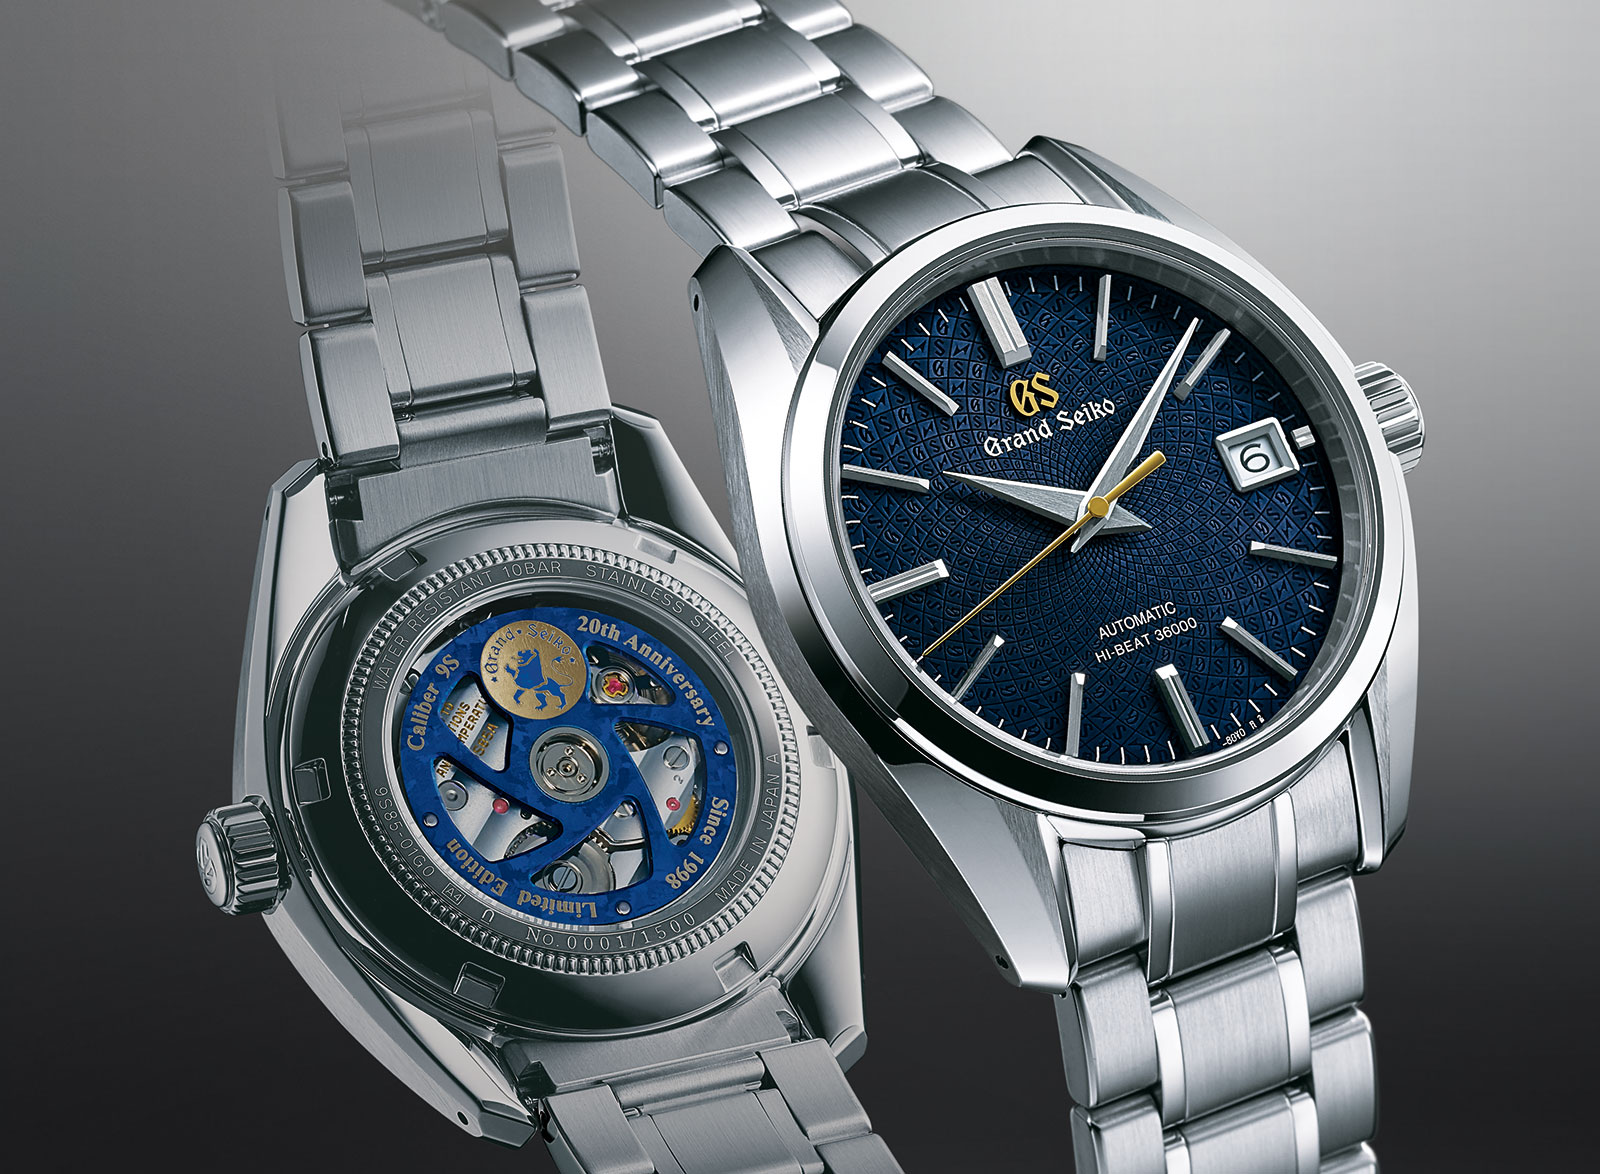 Baselworld 2018: Introducing the Grand Seiko Hi-Beat ., and 9S 20th  Anniversary Editions | SJX Watches